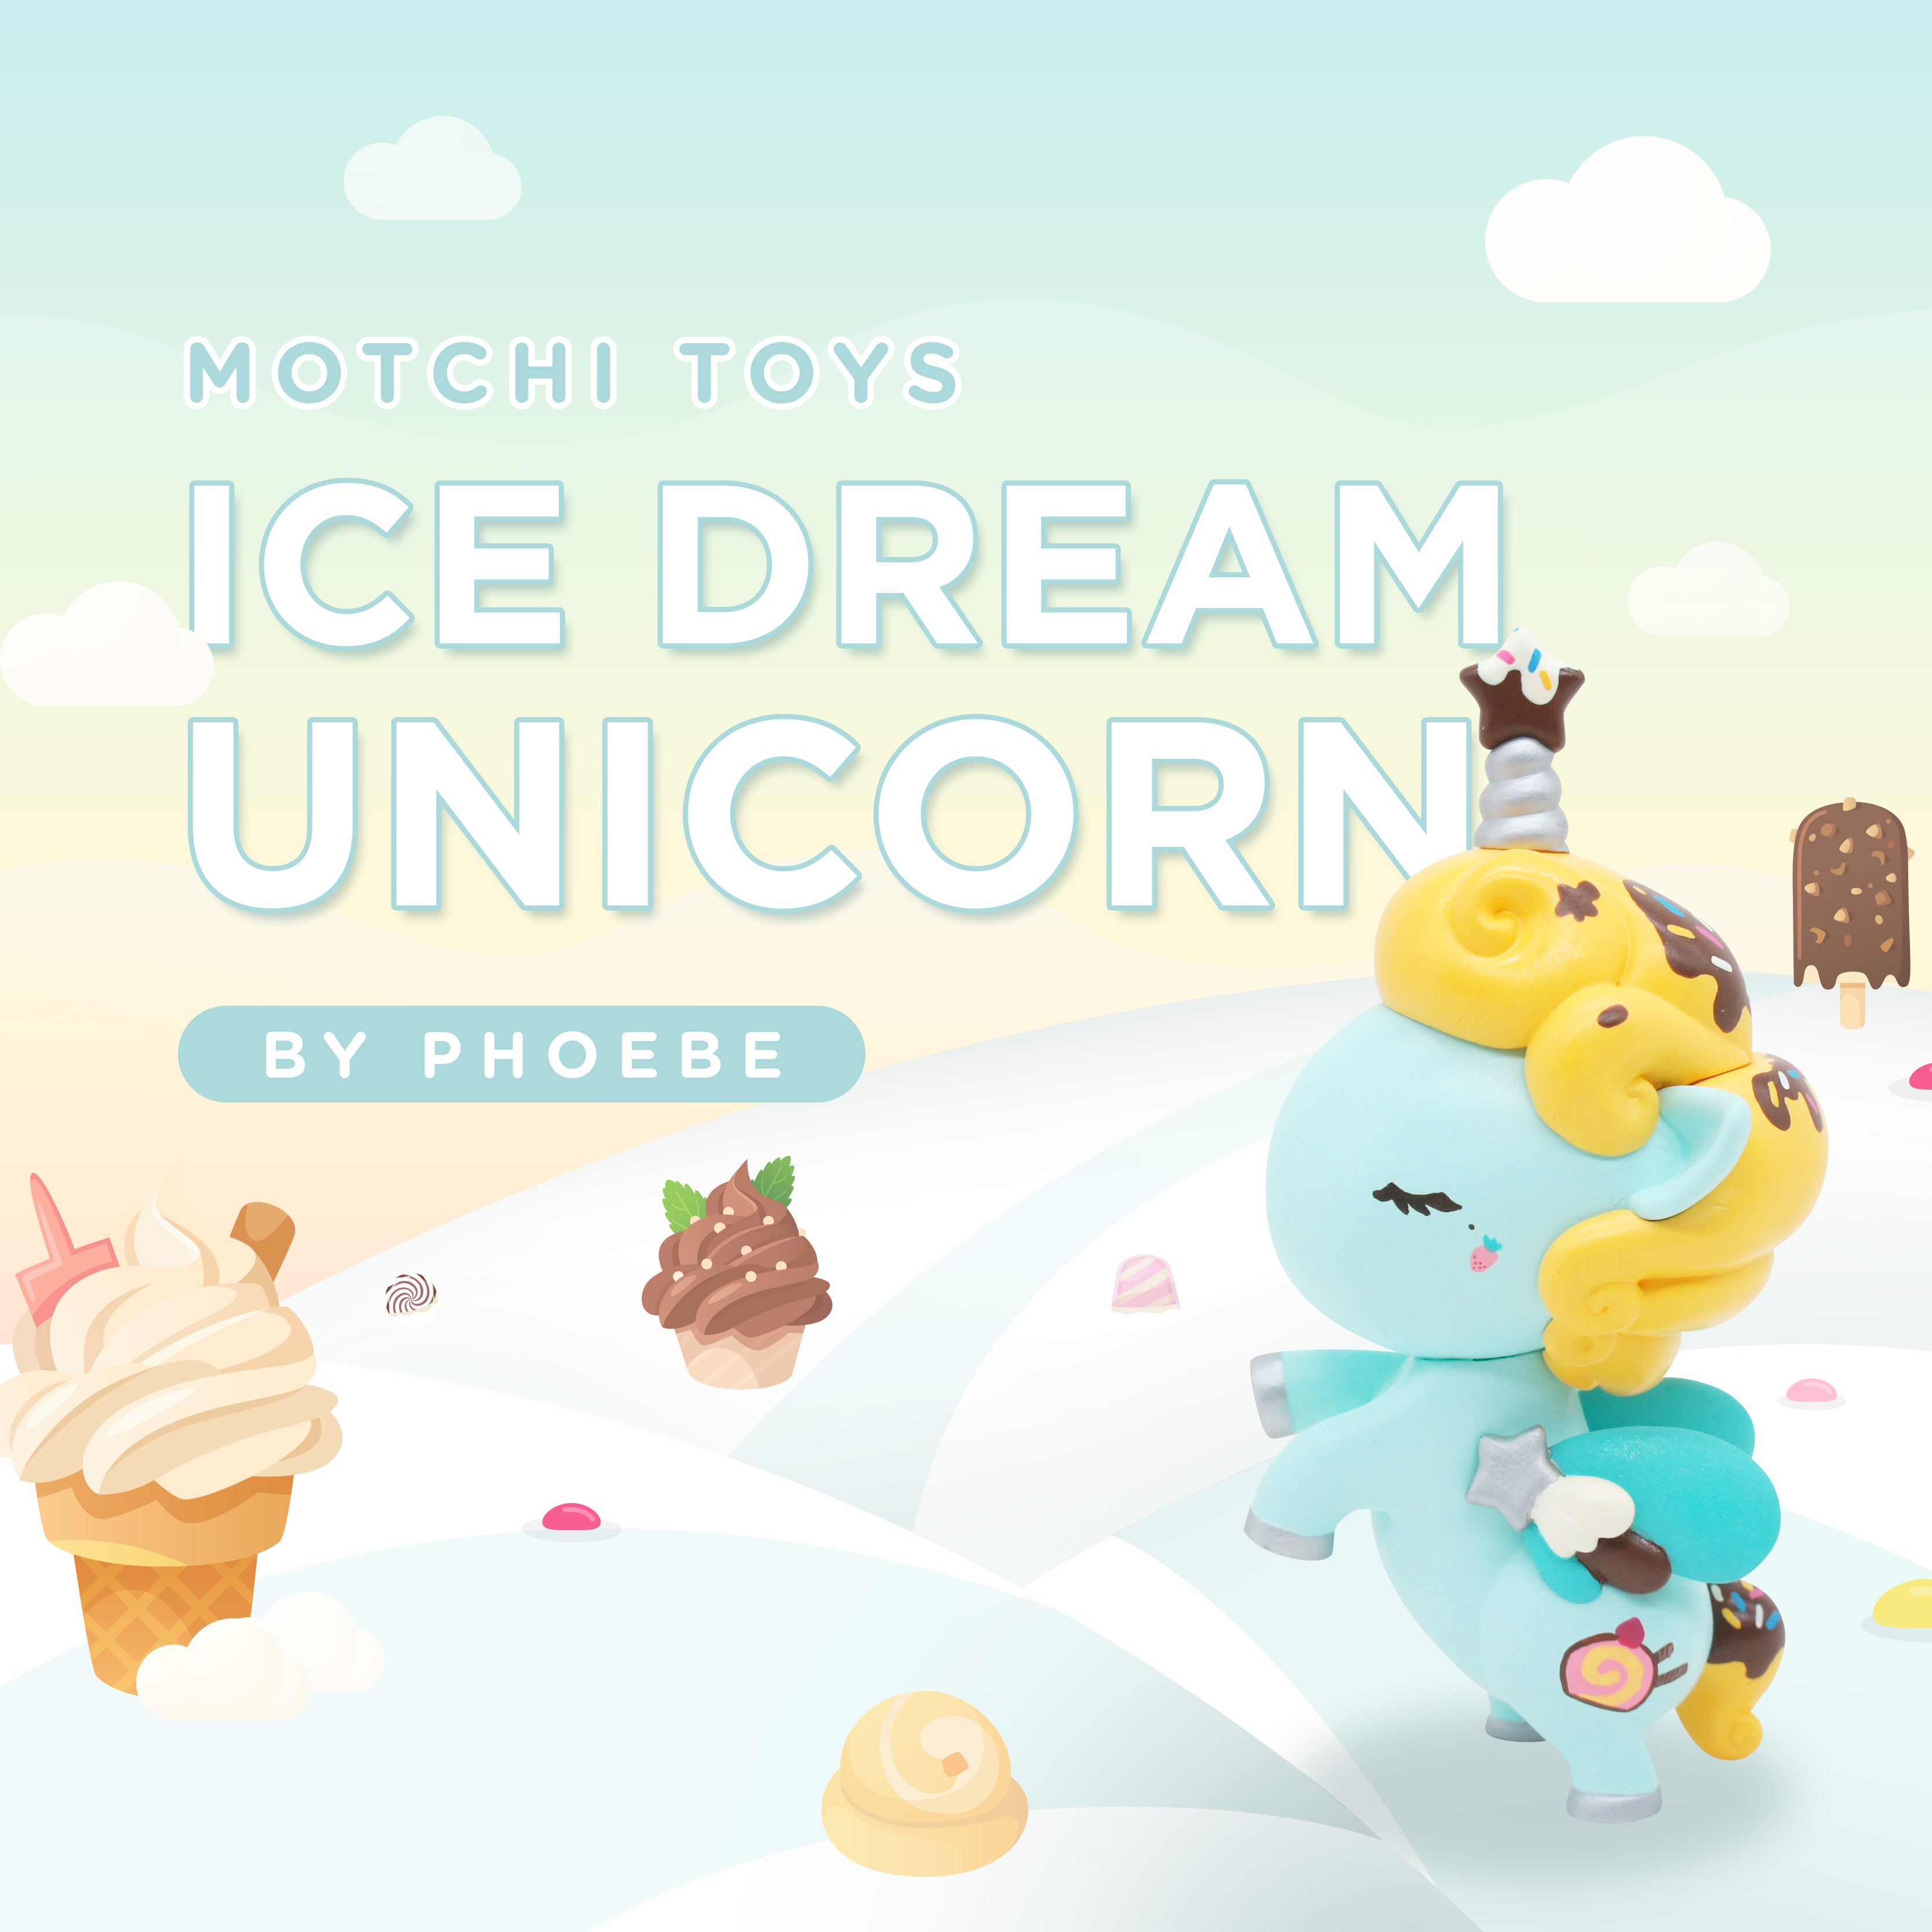 A toy unicorn with a star on its horn, inspired by a story of transformation and hope.